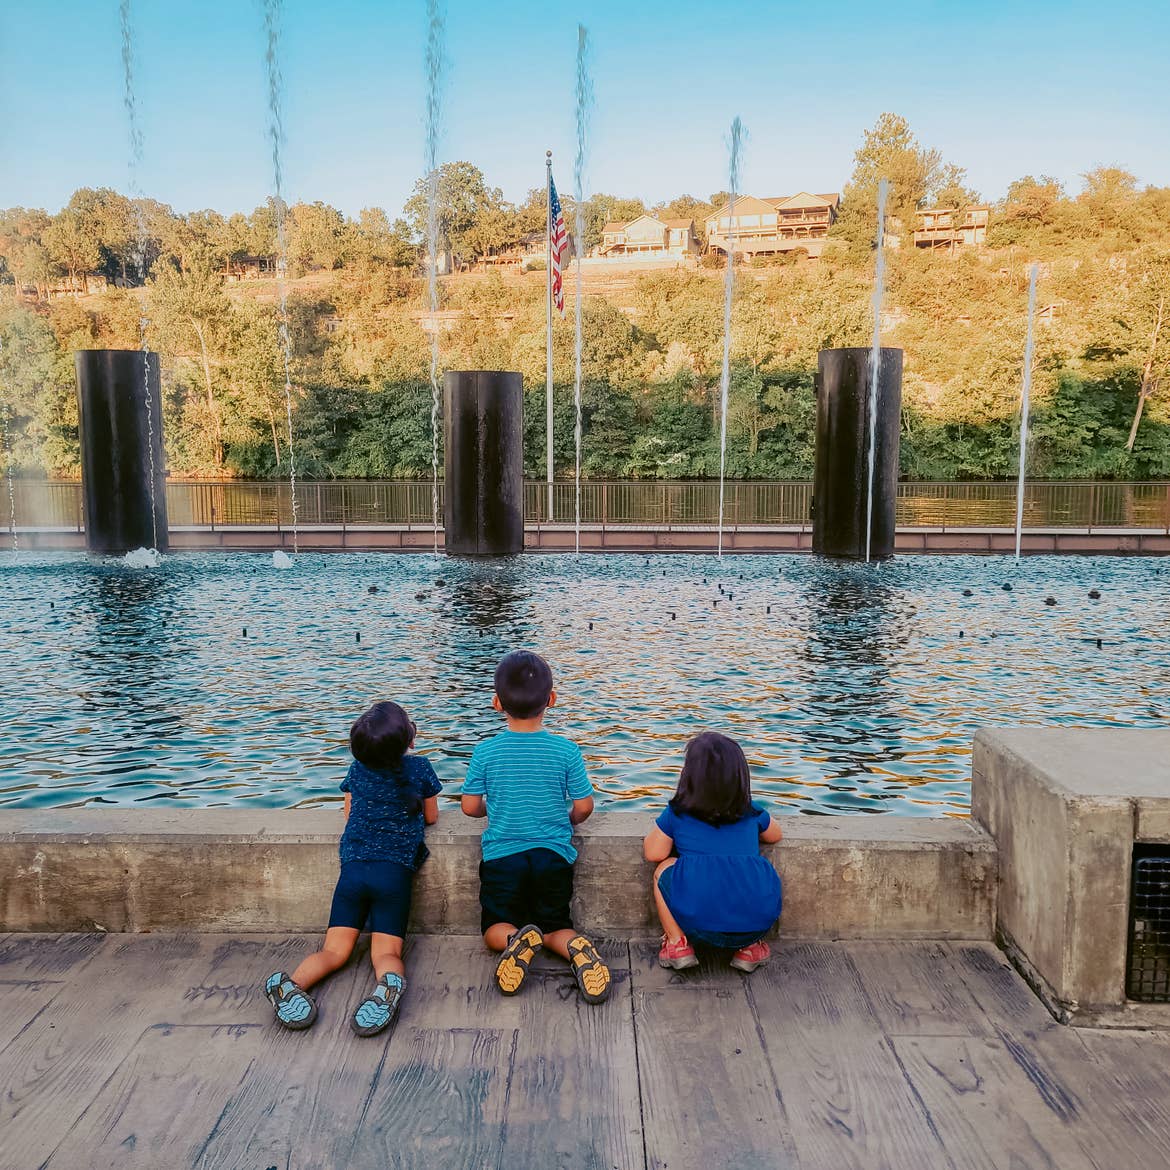 Angelica's kids at the fountain show